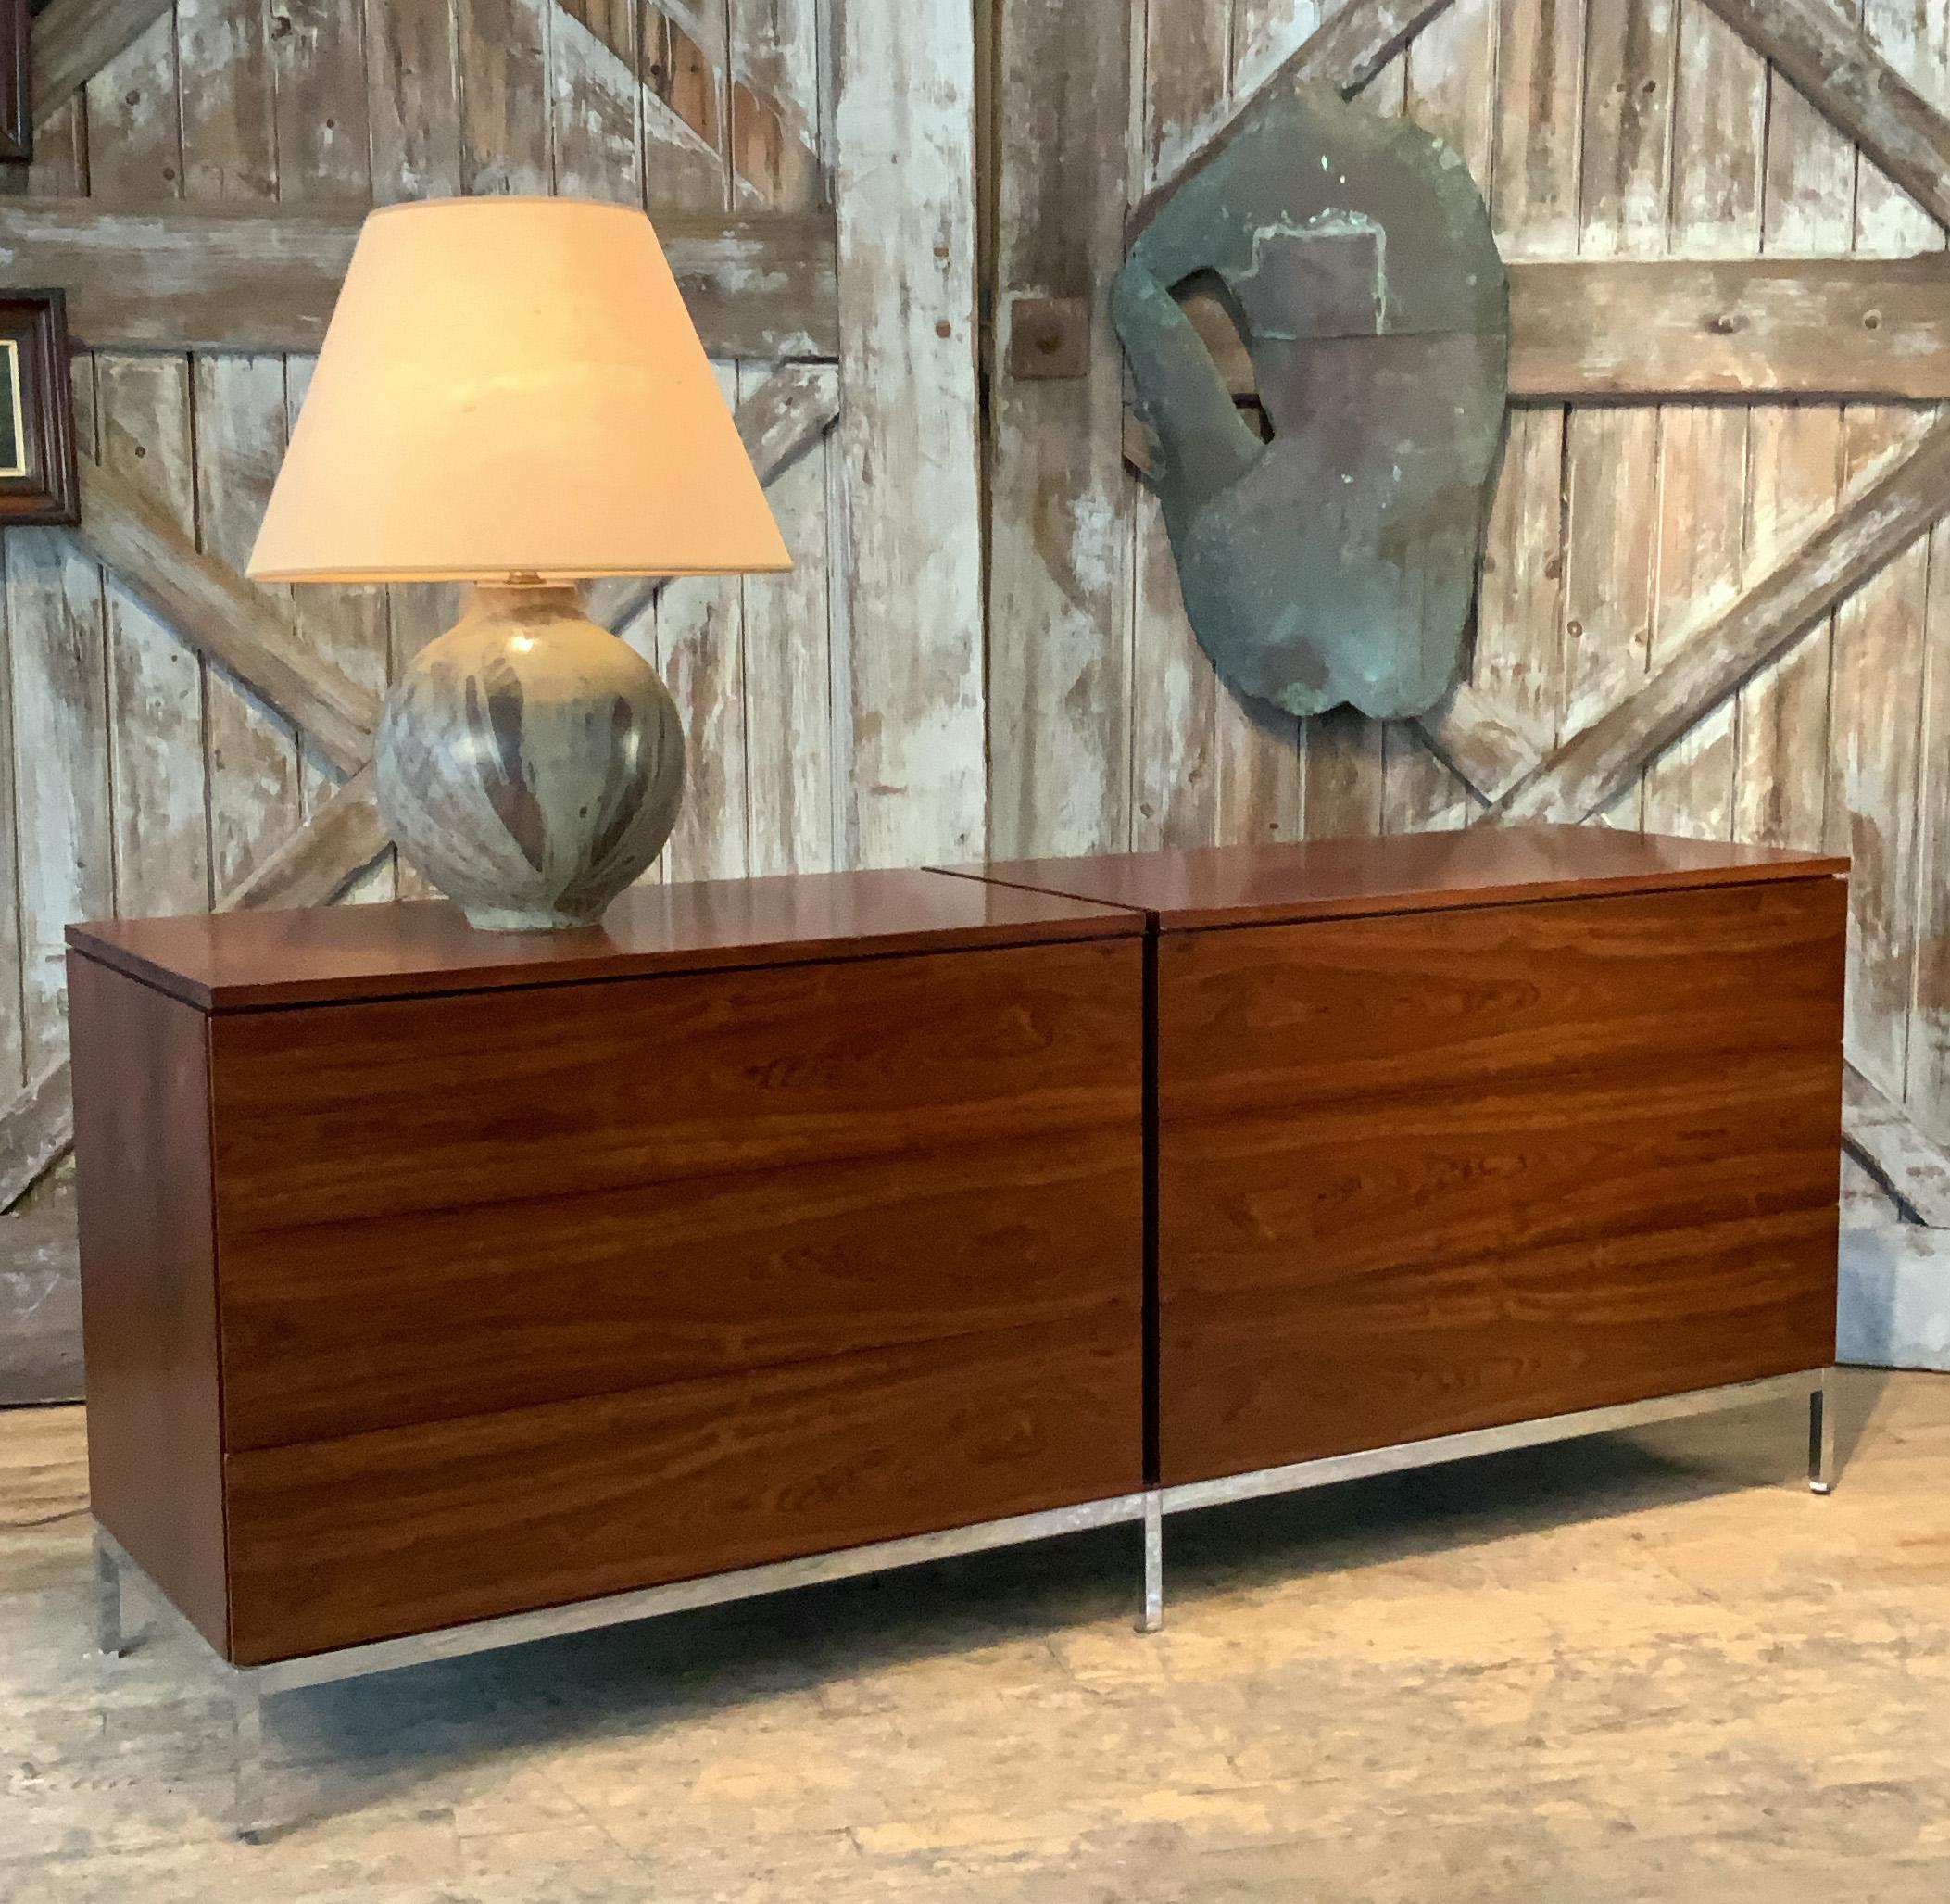 A rare and stunning vintage 1961 rosewood double chest of drawers designed by Florence Knoll for Knoll Associates. beautiful scale and details, with six drawers, many with removable interior divisions. this chest has been beautifully restored, and